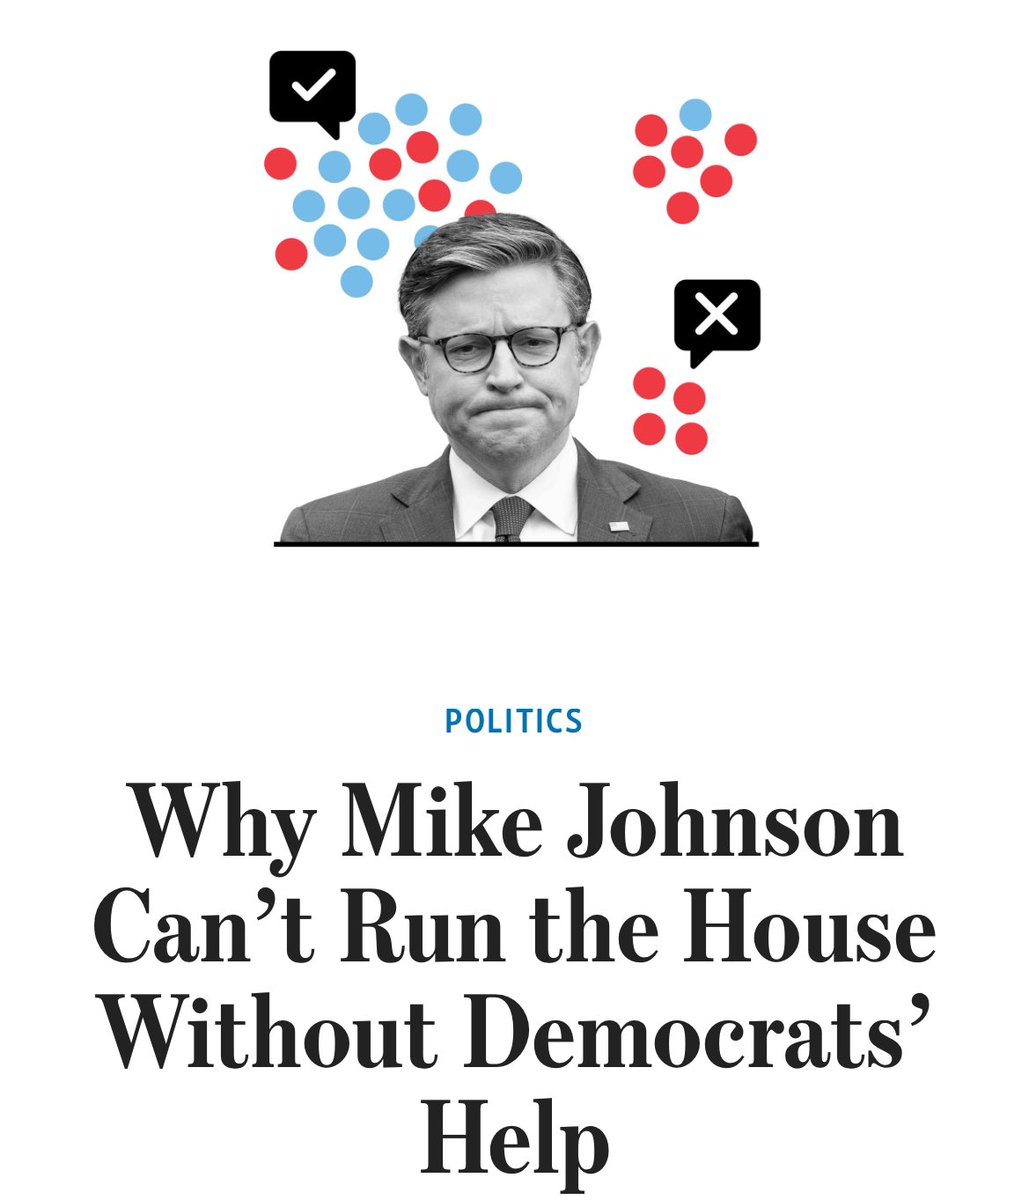 JOHNSON: “.. on many pieces of legislation, you need Republicans and Democrats to get it across the line. .. That’s the reality .. and we work with what we have.” @WSJ @lindsaywise wsj.com/politics/why-m…